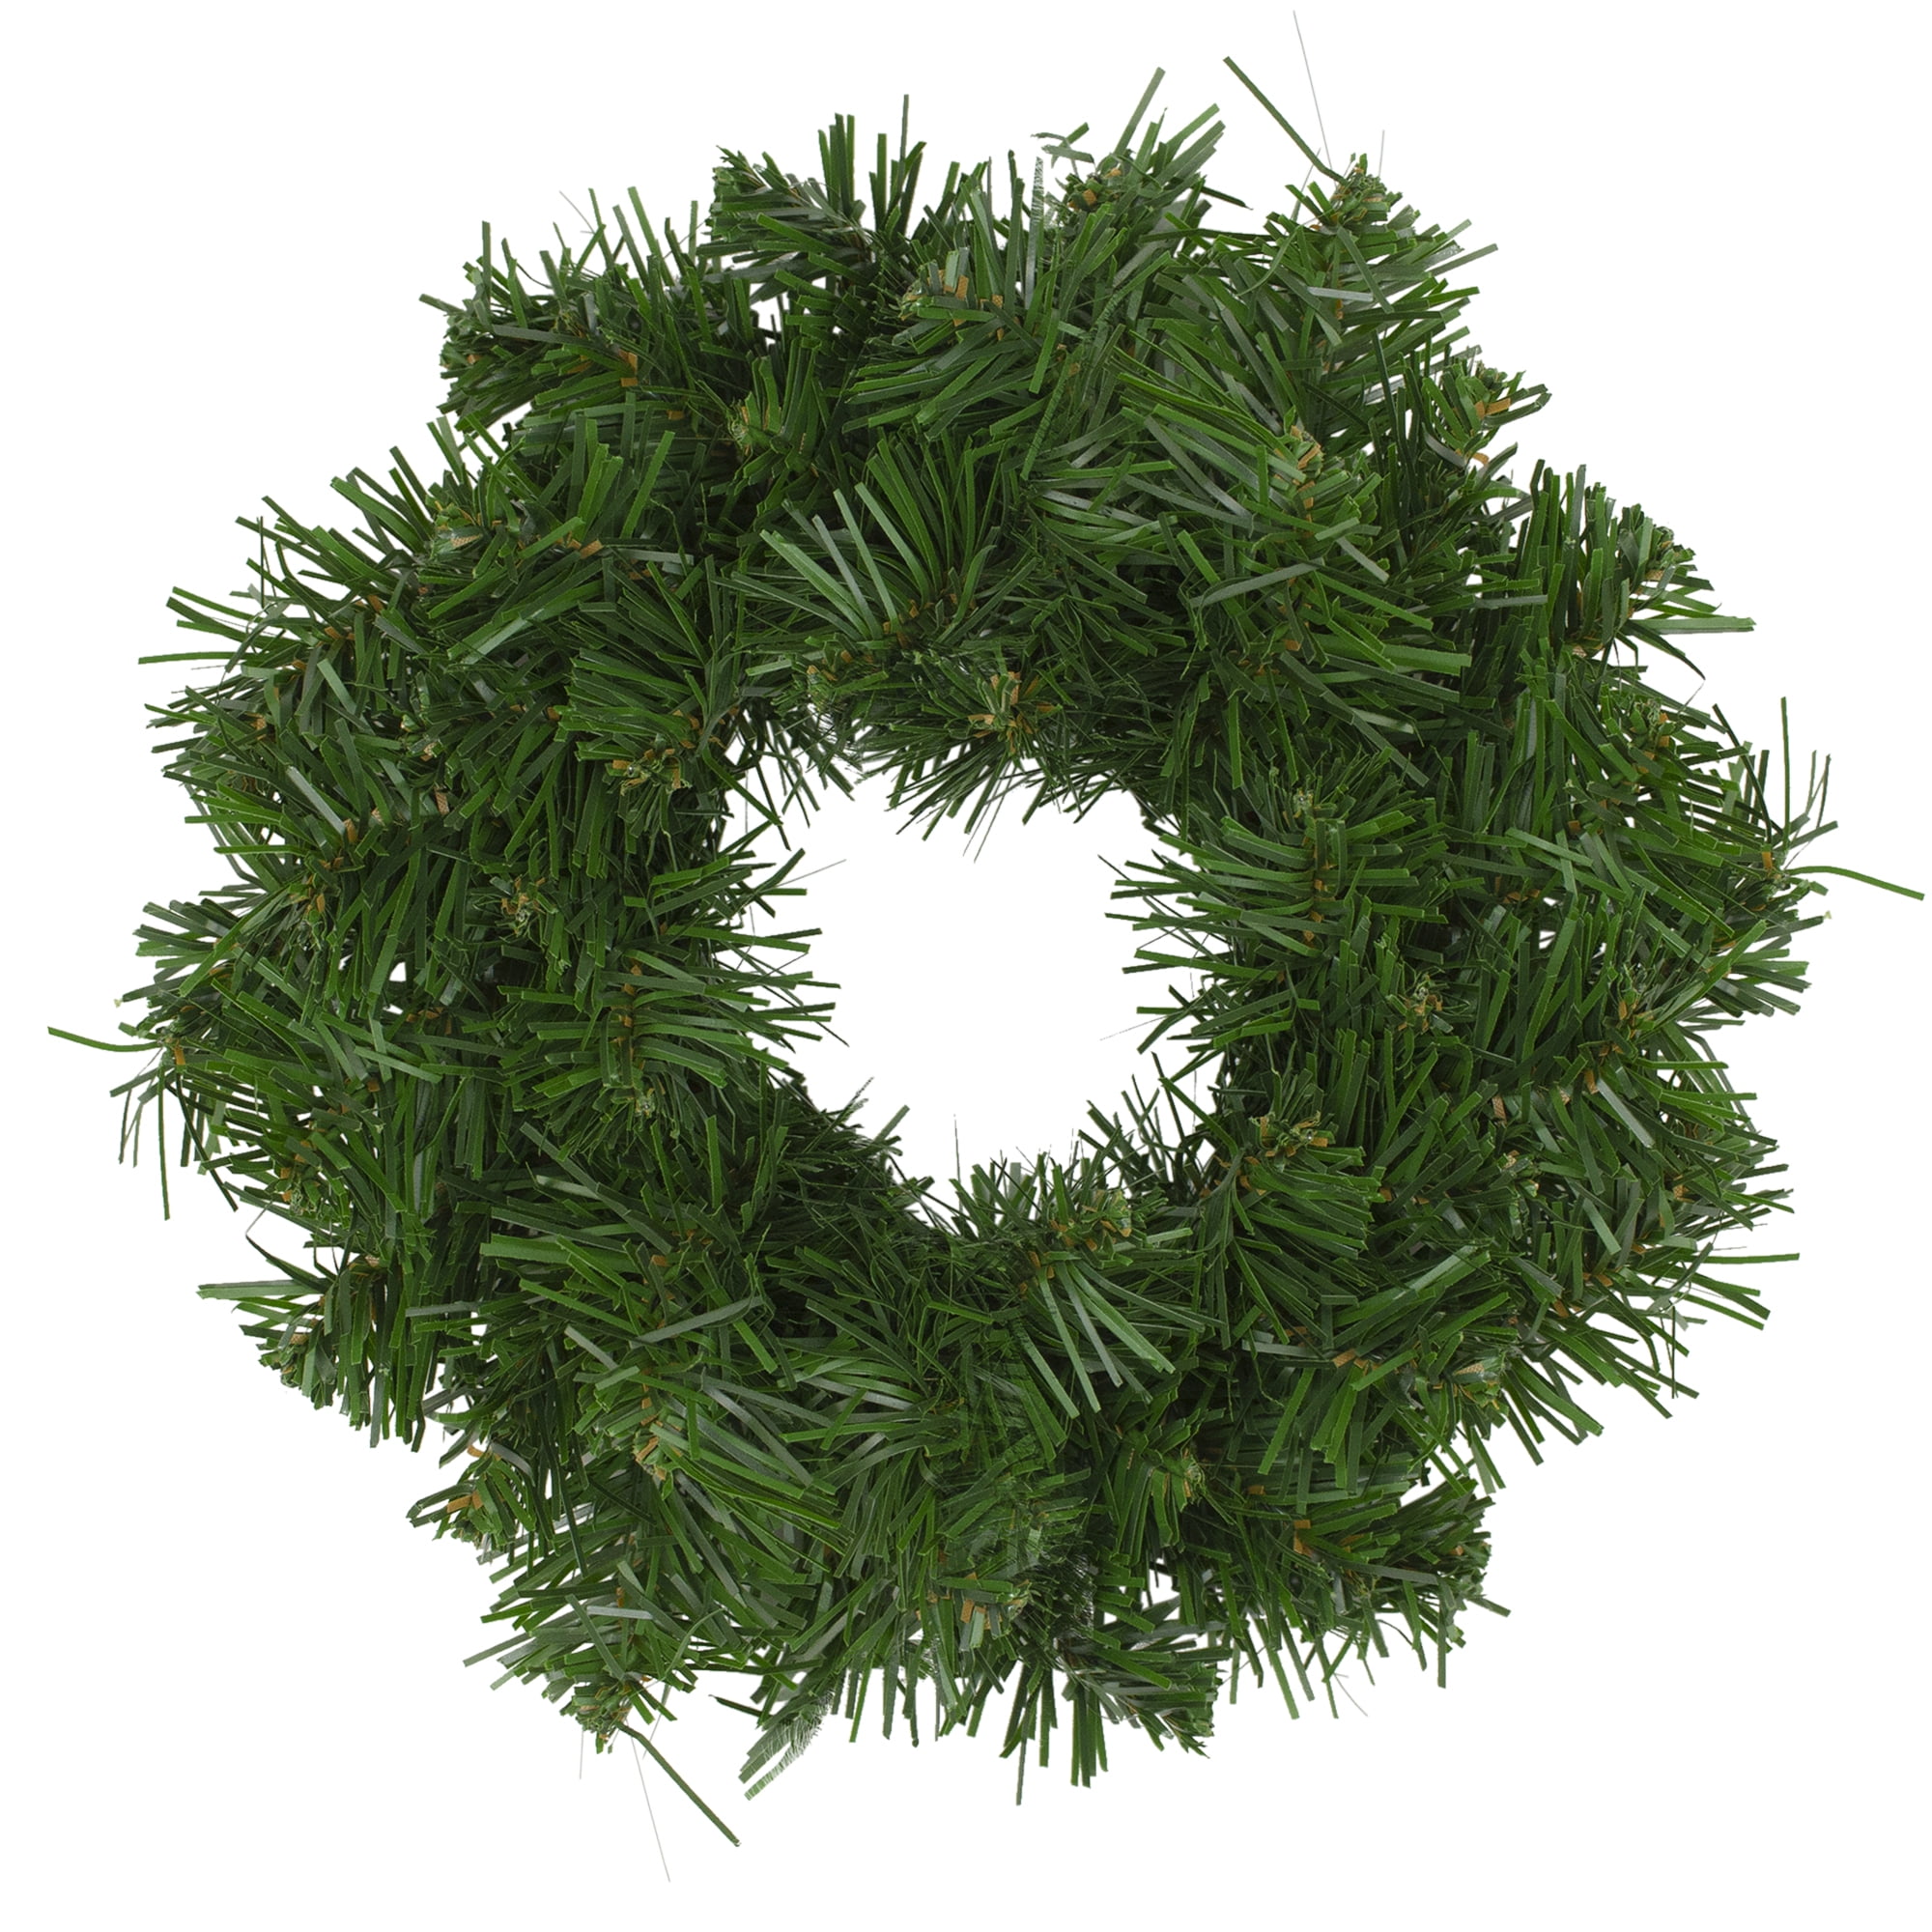 Unlit Northlight 8 Commercial Size Canadian Pine Artificial Christmas Wreath